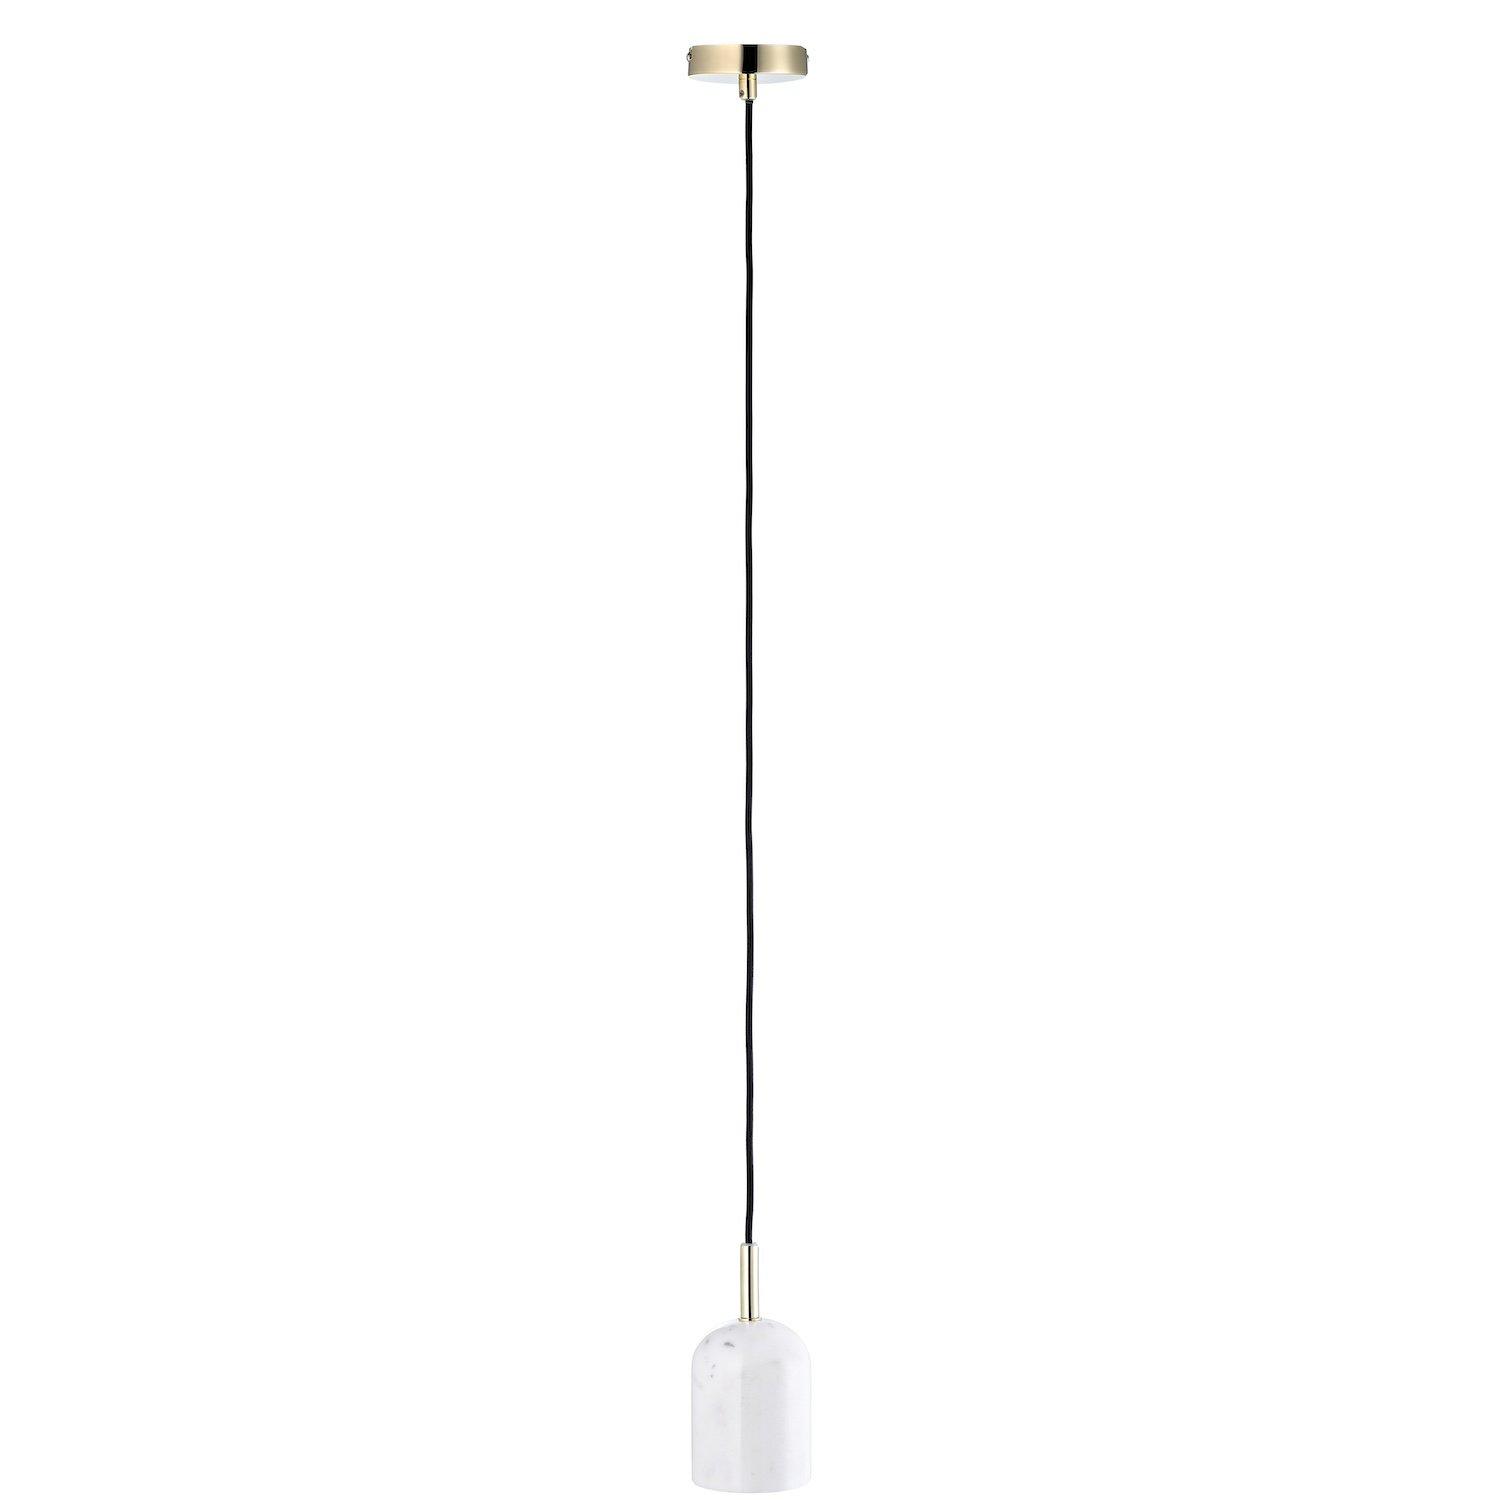 White Marble Pendant Lamp Fitting in Scandinavian Design with Black Fabric Cable